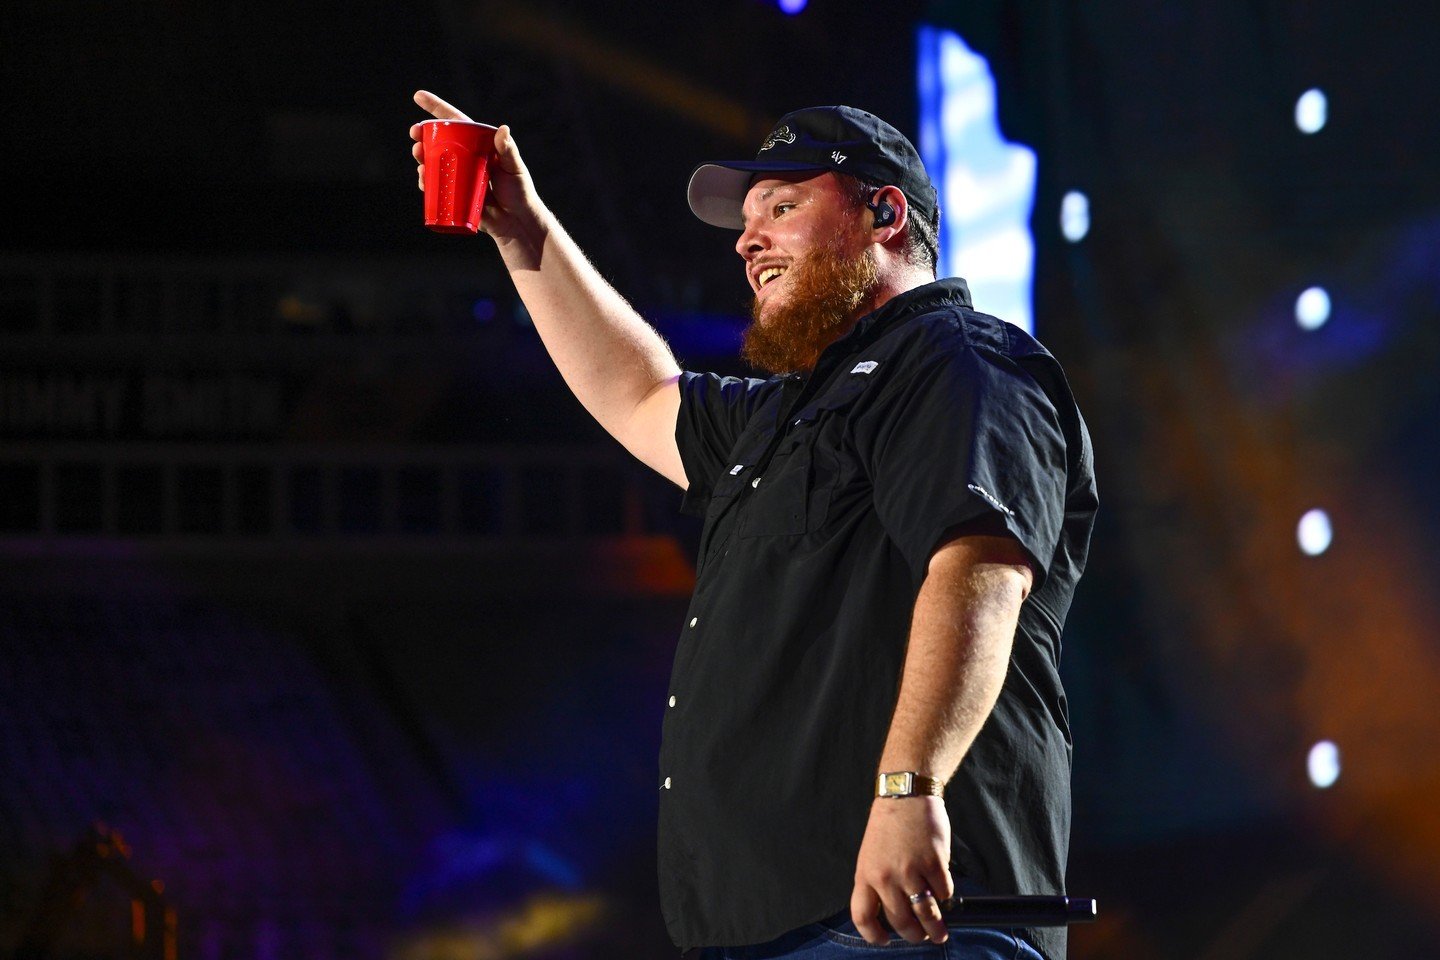 A huge thank you to @LukeCombs for two beautiful, crazy nights at EverBank Stadium! Here's to the memories made and the songs that'll be on repeat for weeks to come!

📸: Chris Condon